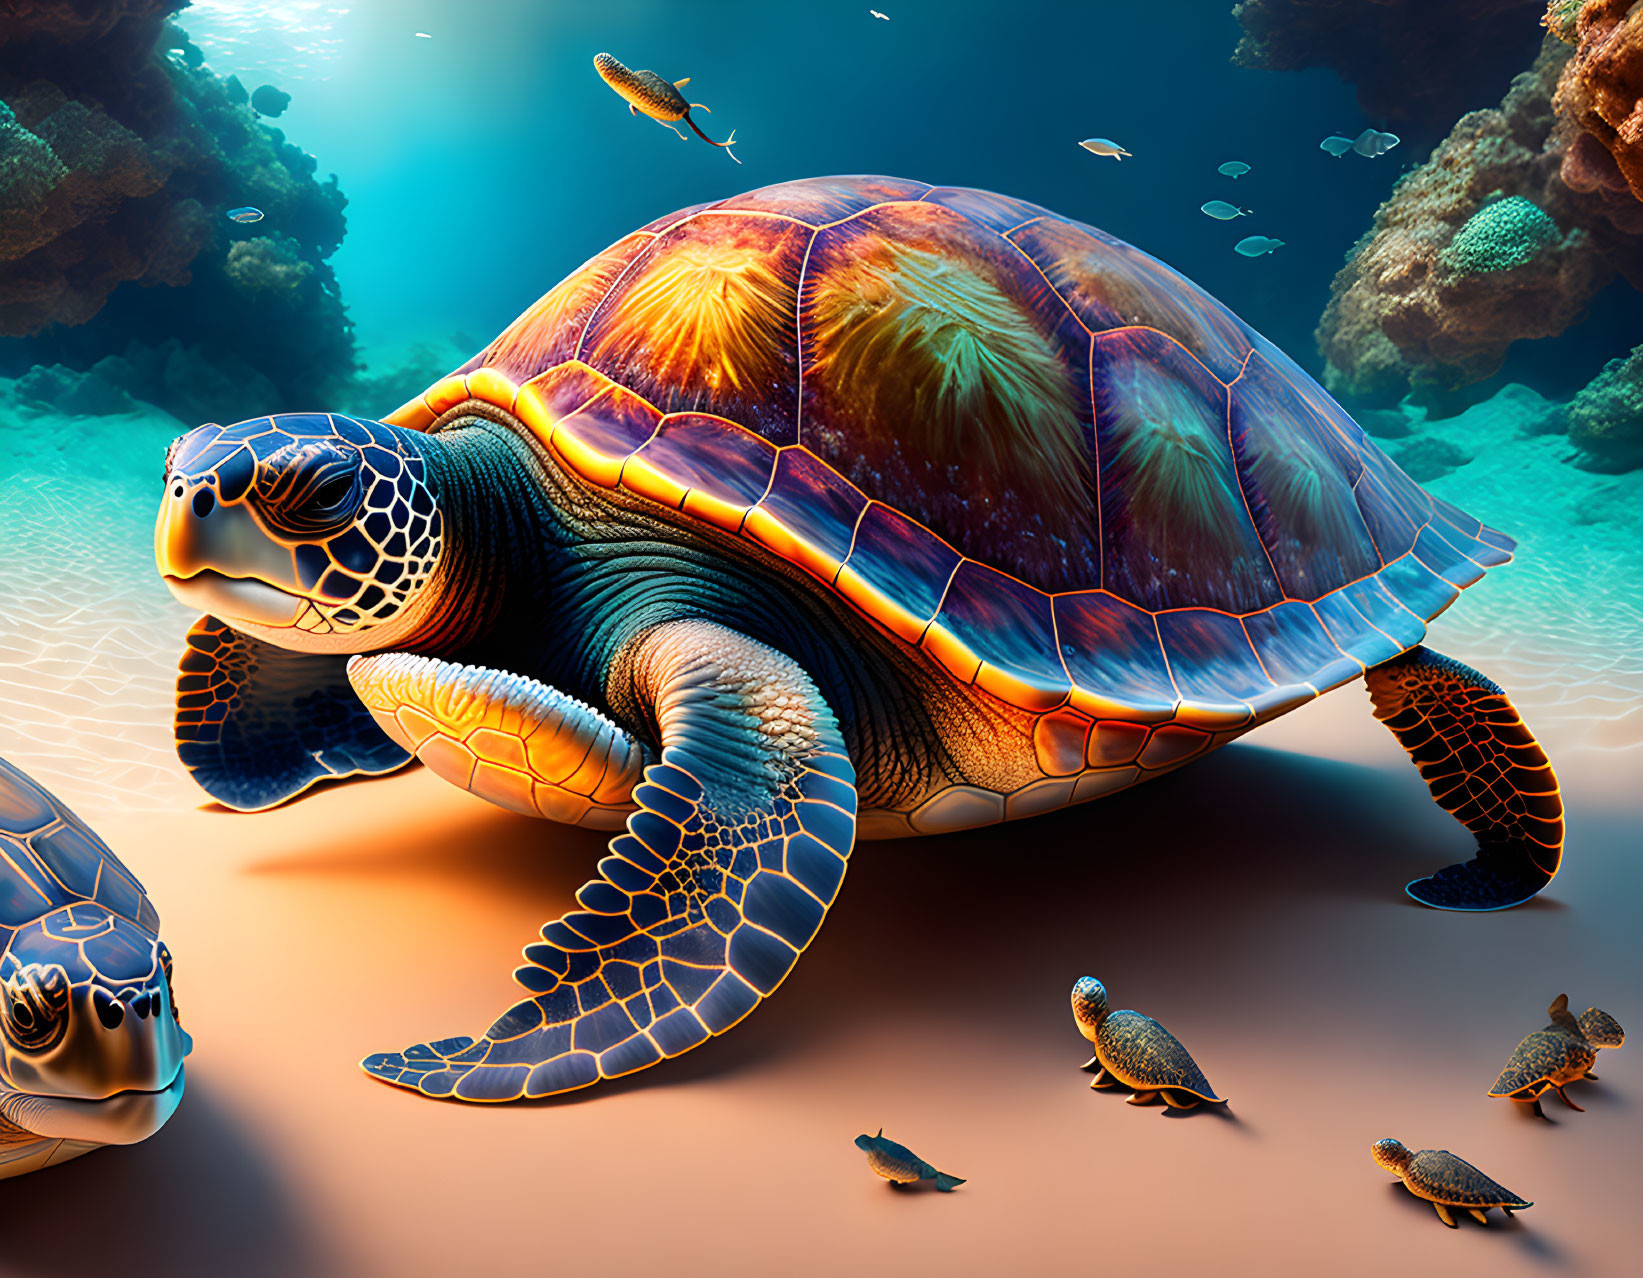 Colorful Sea Turtle Illustration Swimming Among Coral Reefs